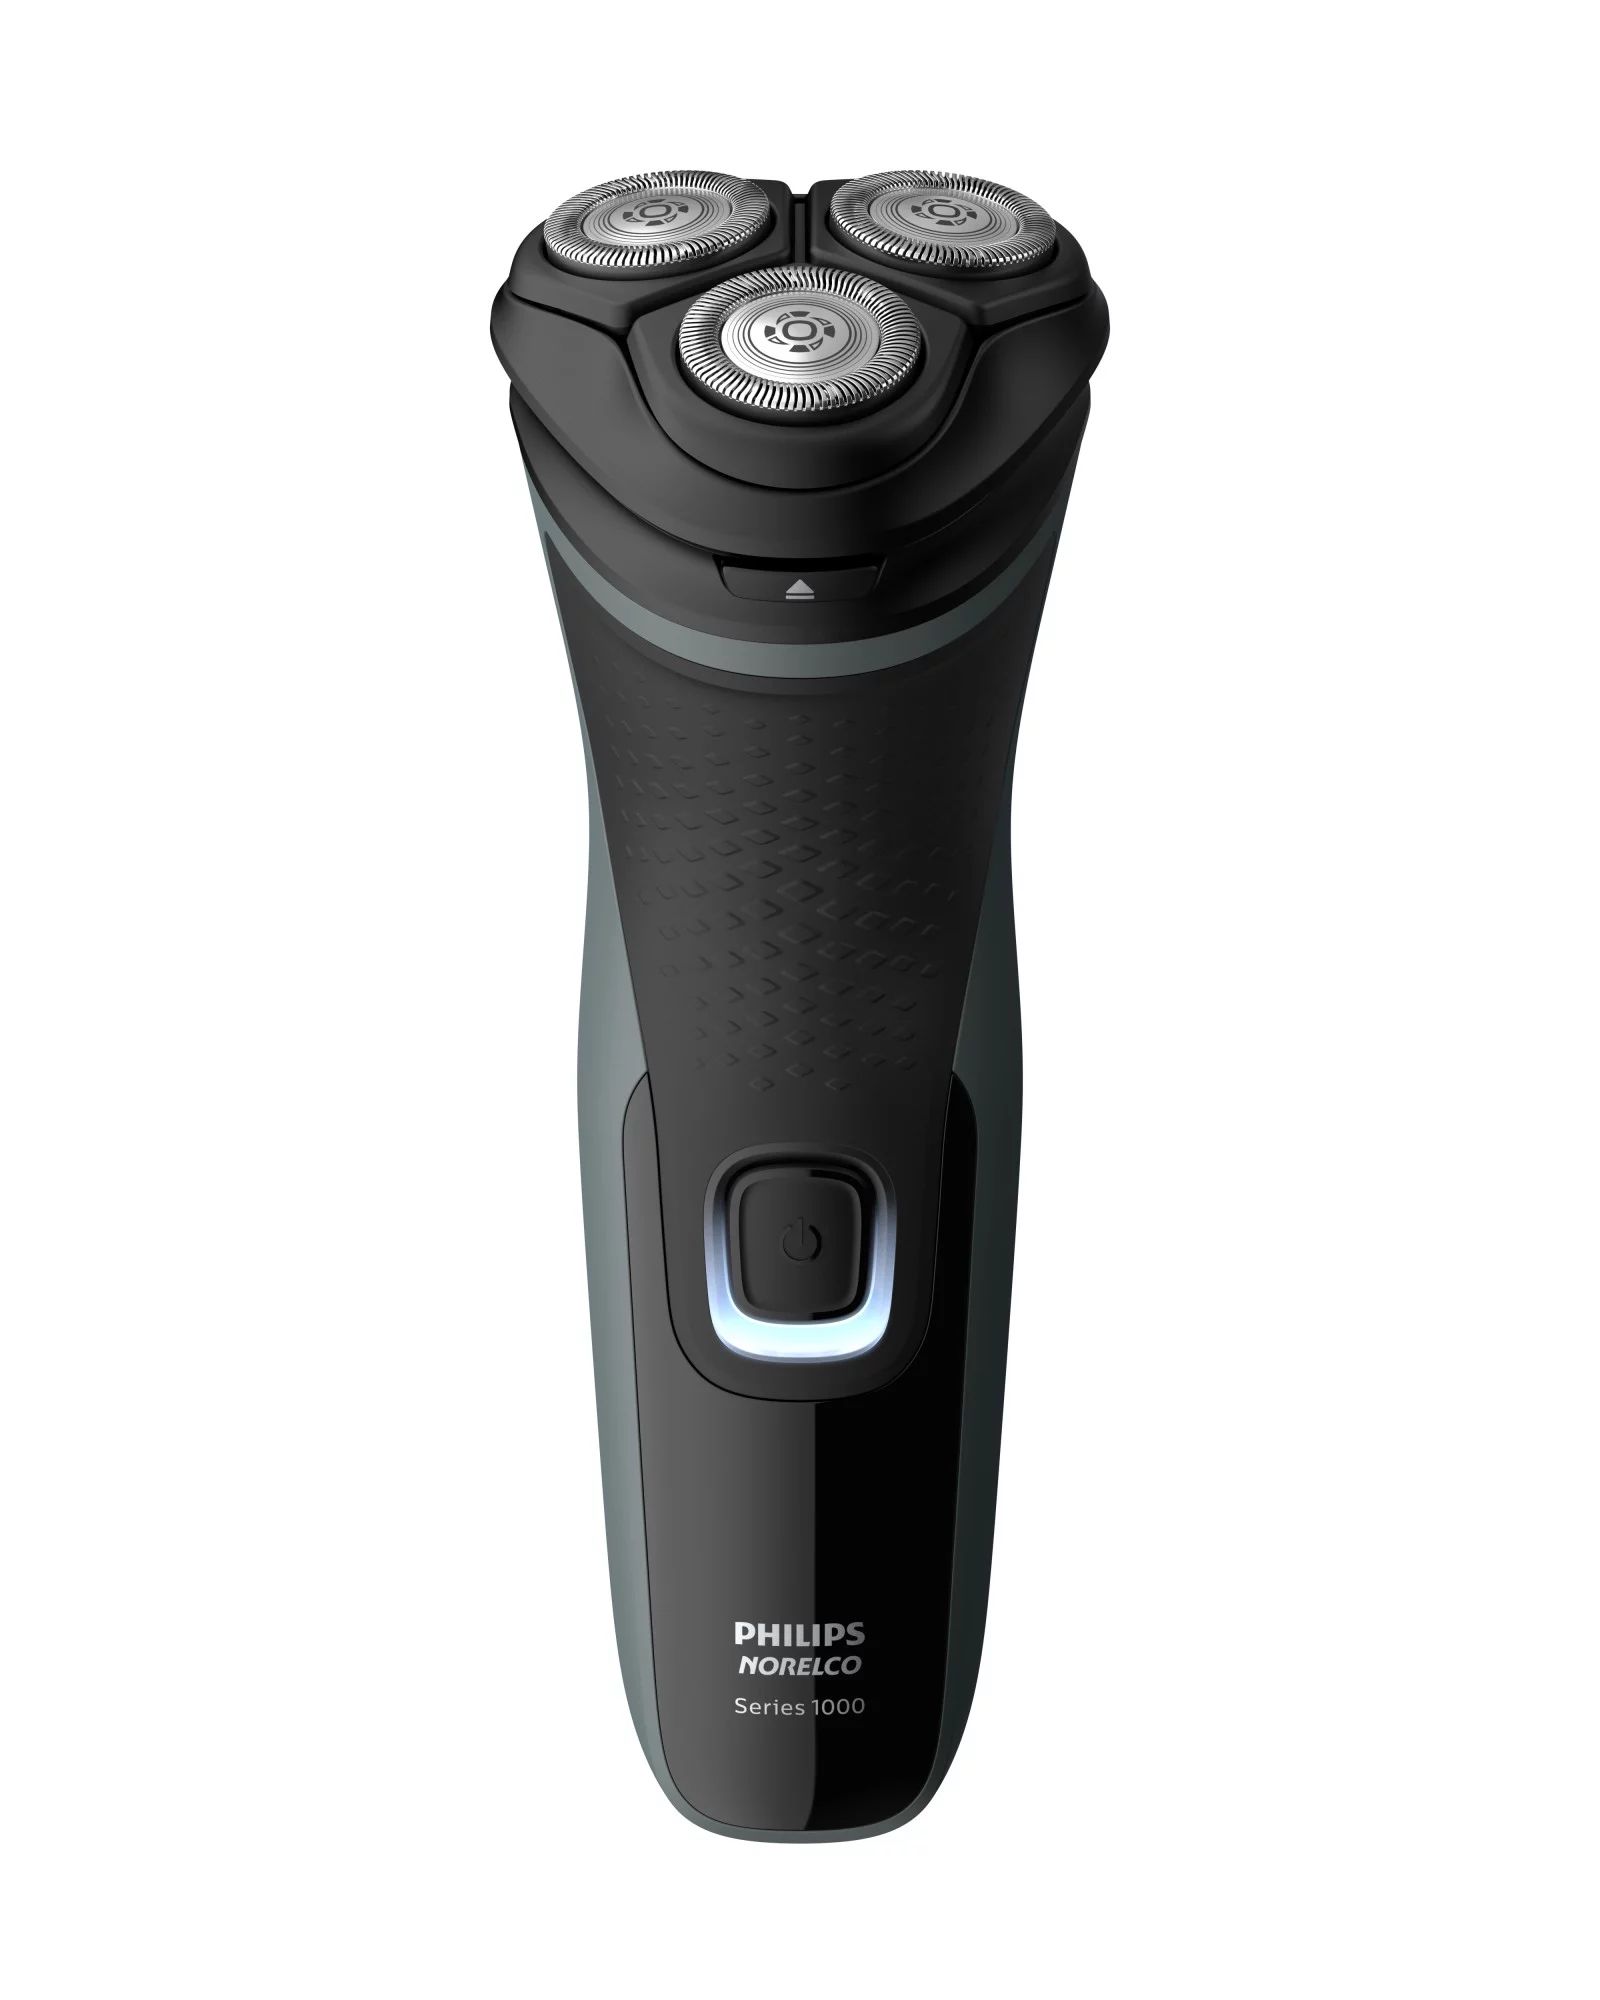 Philips Norelco Shaver 2300, Corded and Rechargeable Cordless Electric Shaver with Pop-Up Trimmer... | Walmart (US)